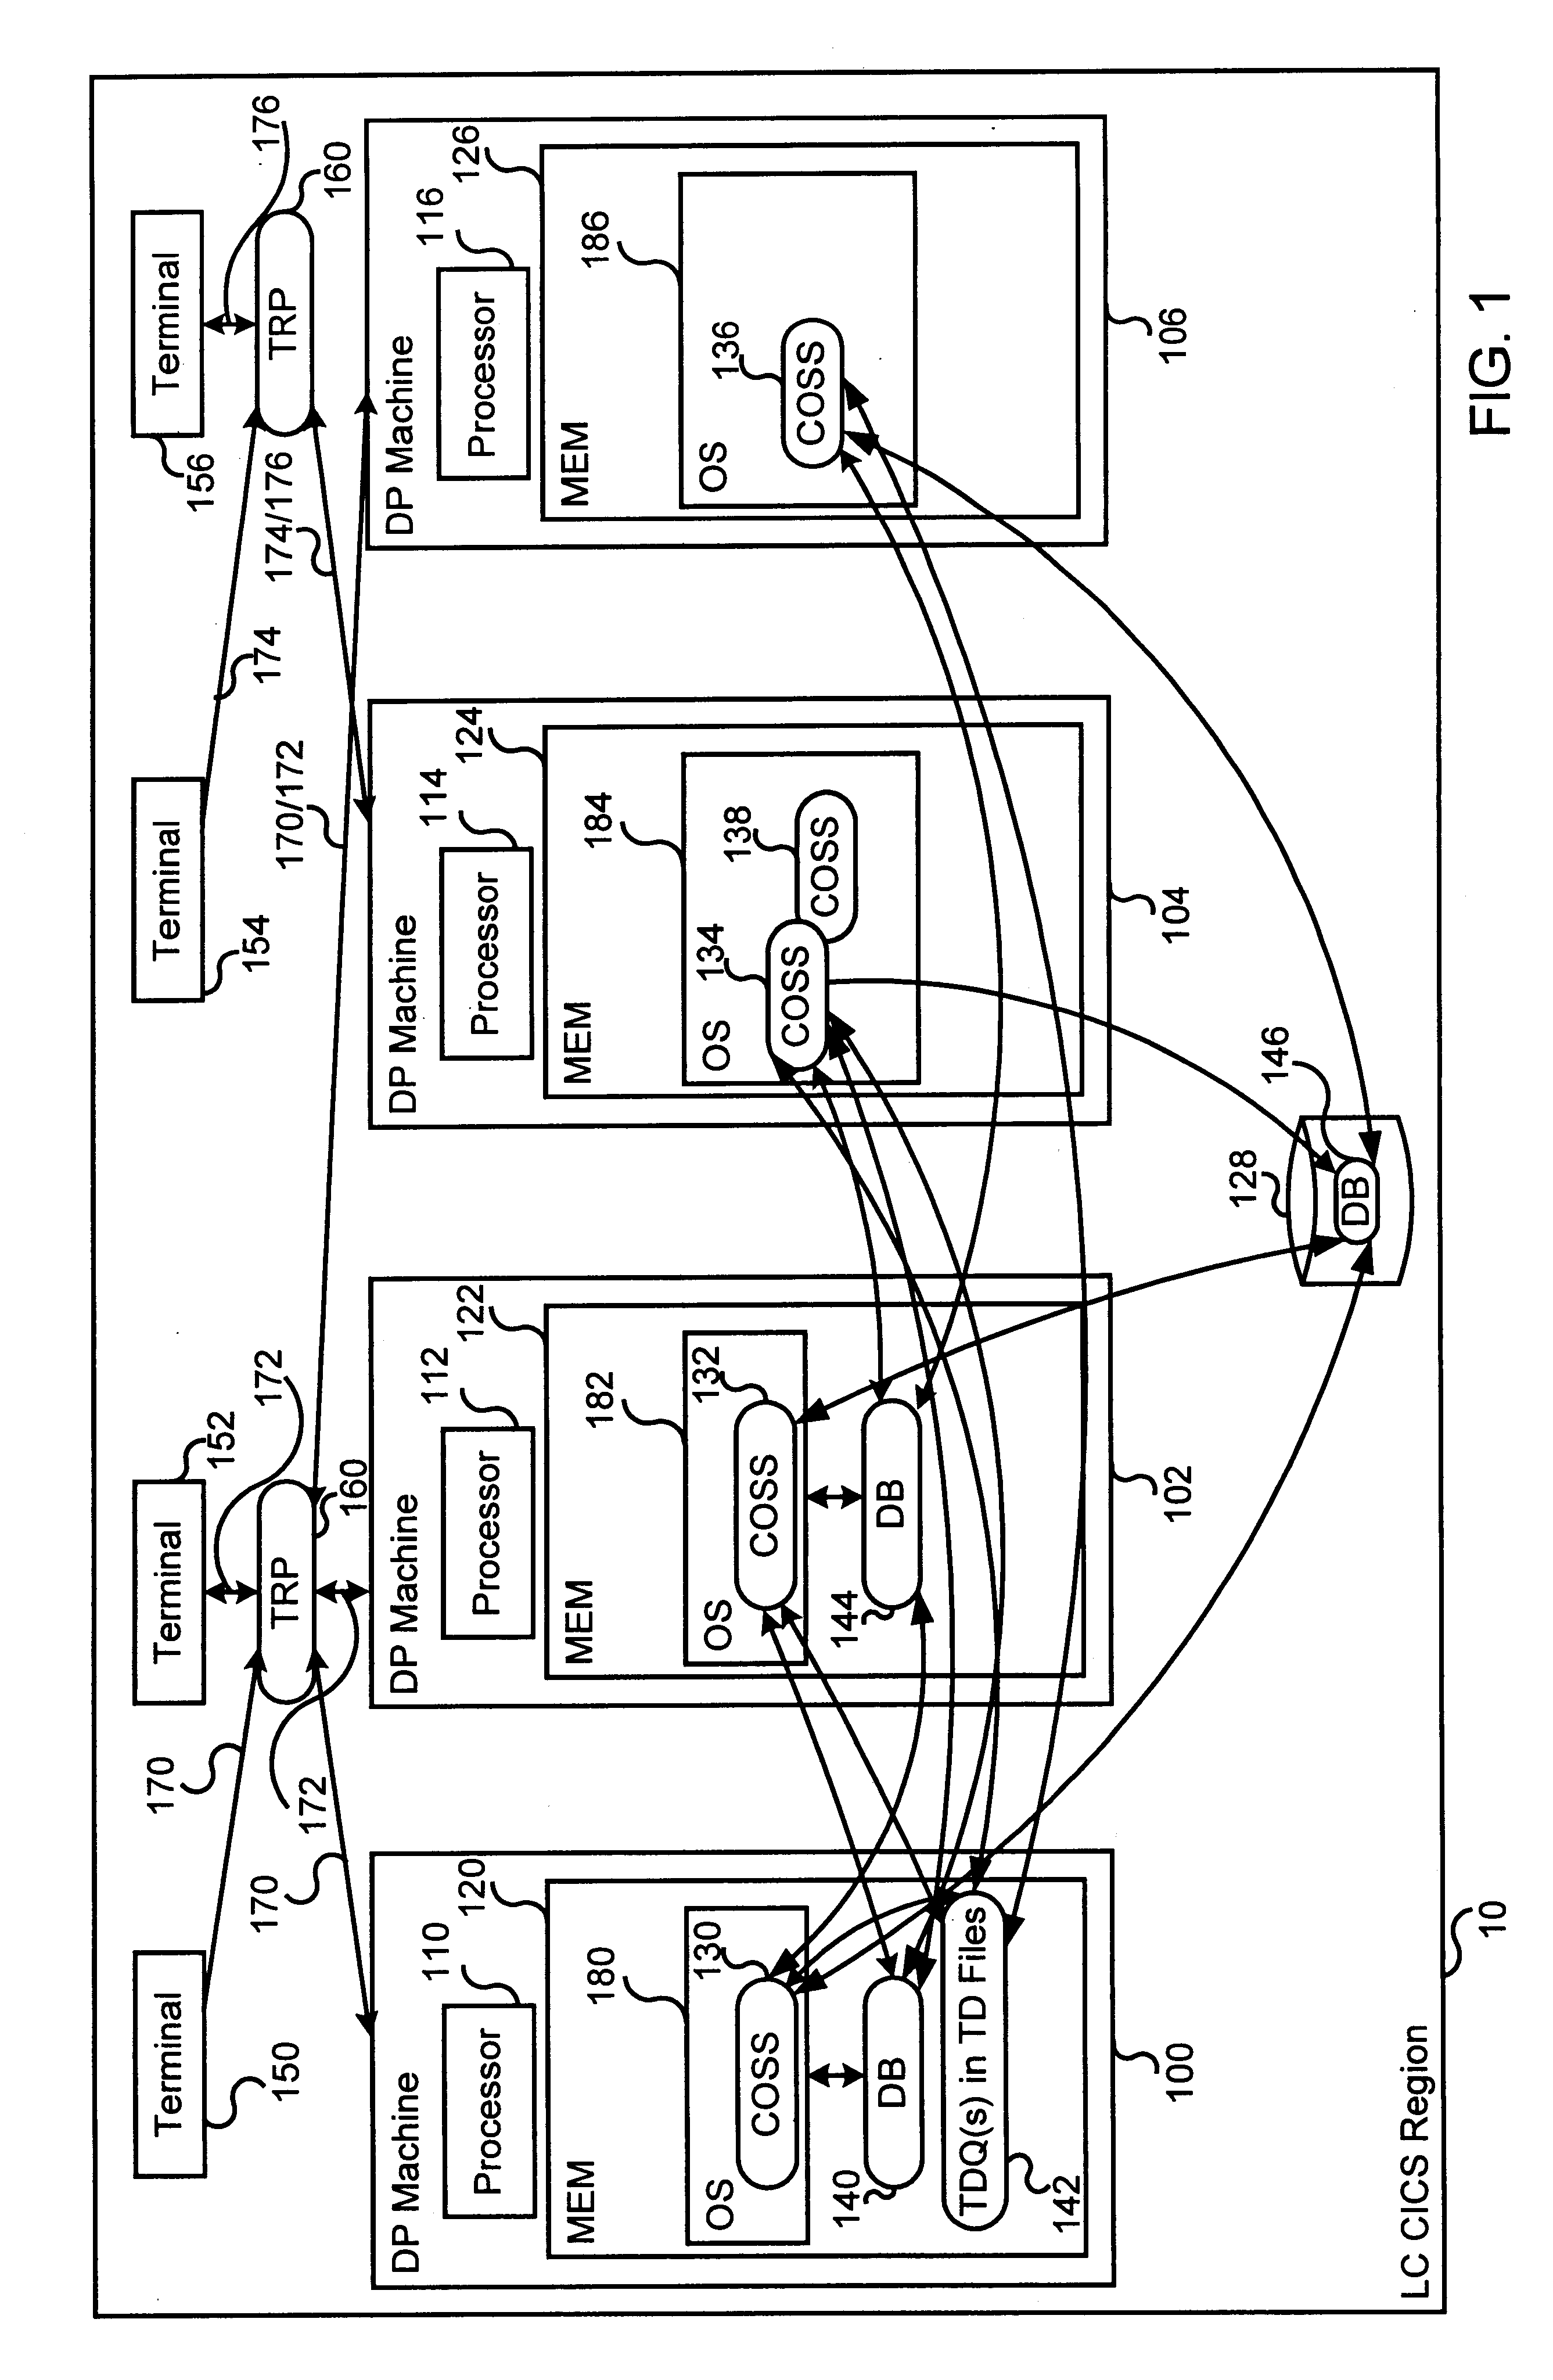 Customer information control system application programming interface with transient data functions, in a loosely coupled data processing environment